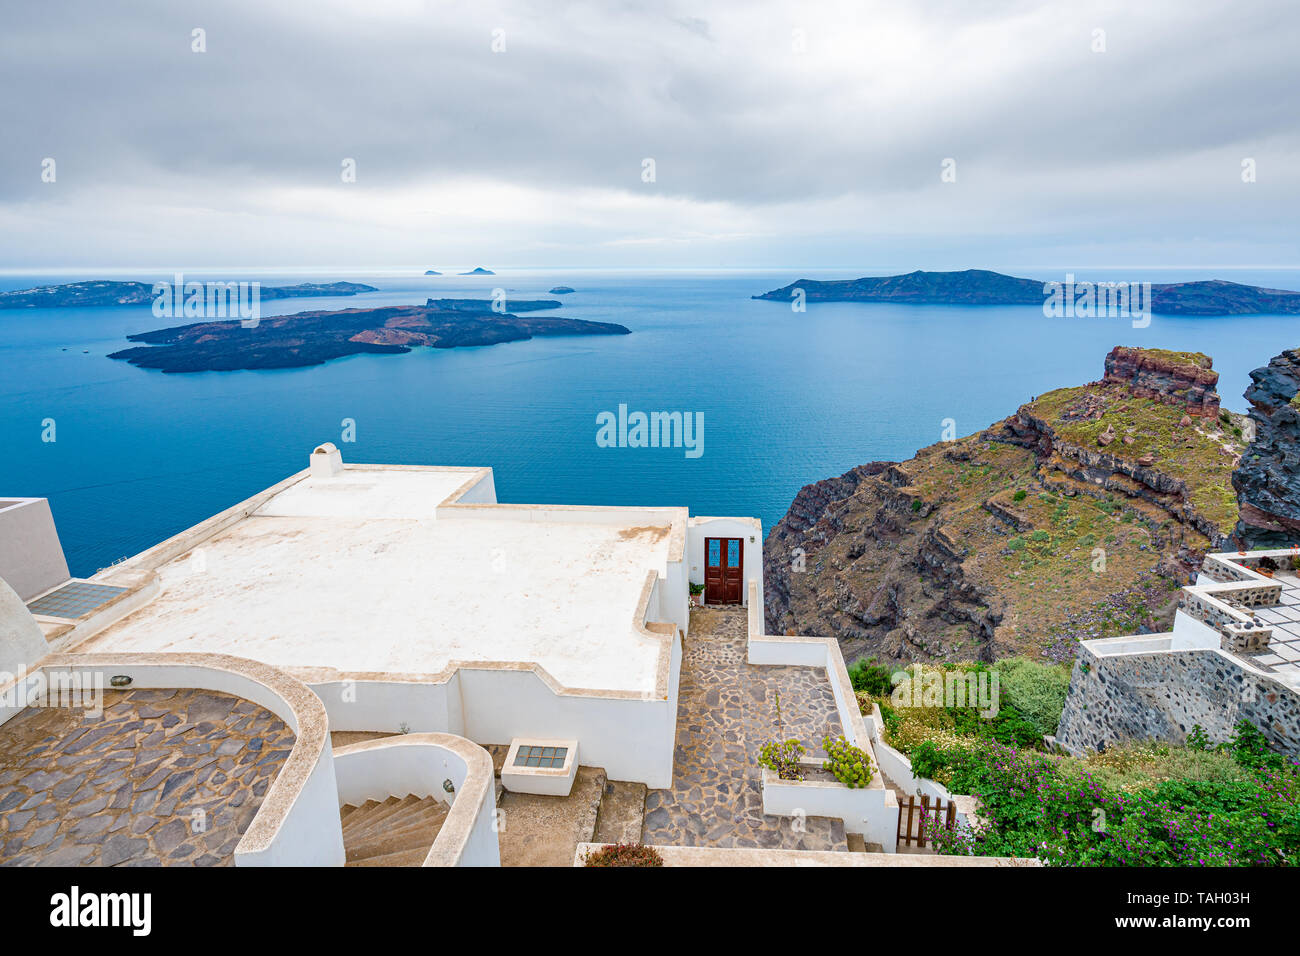 Panoramic View of Santorini Island in Greece, one of the most beautiful travel destinations of the world. Stock Photo